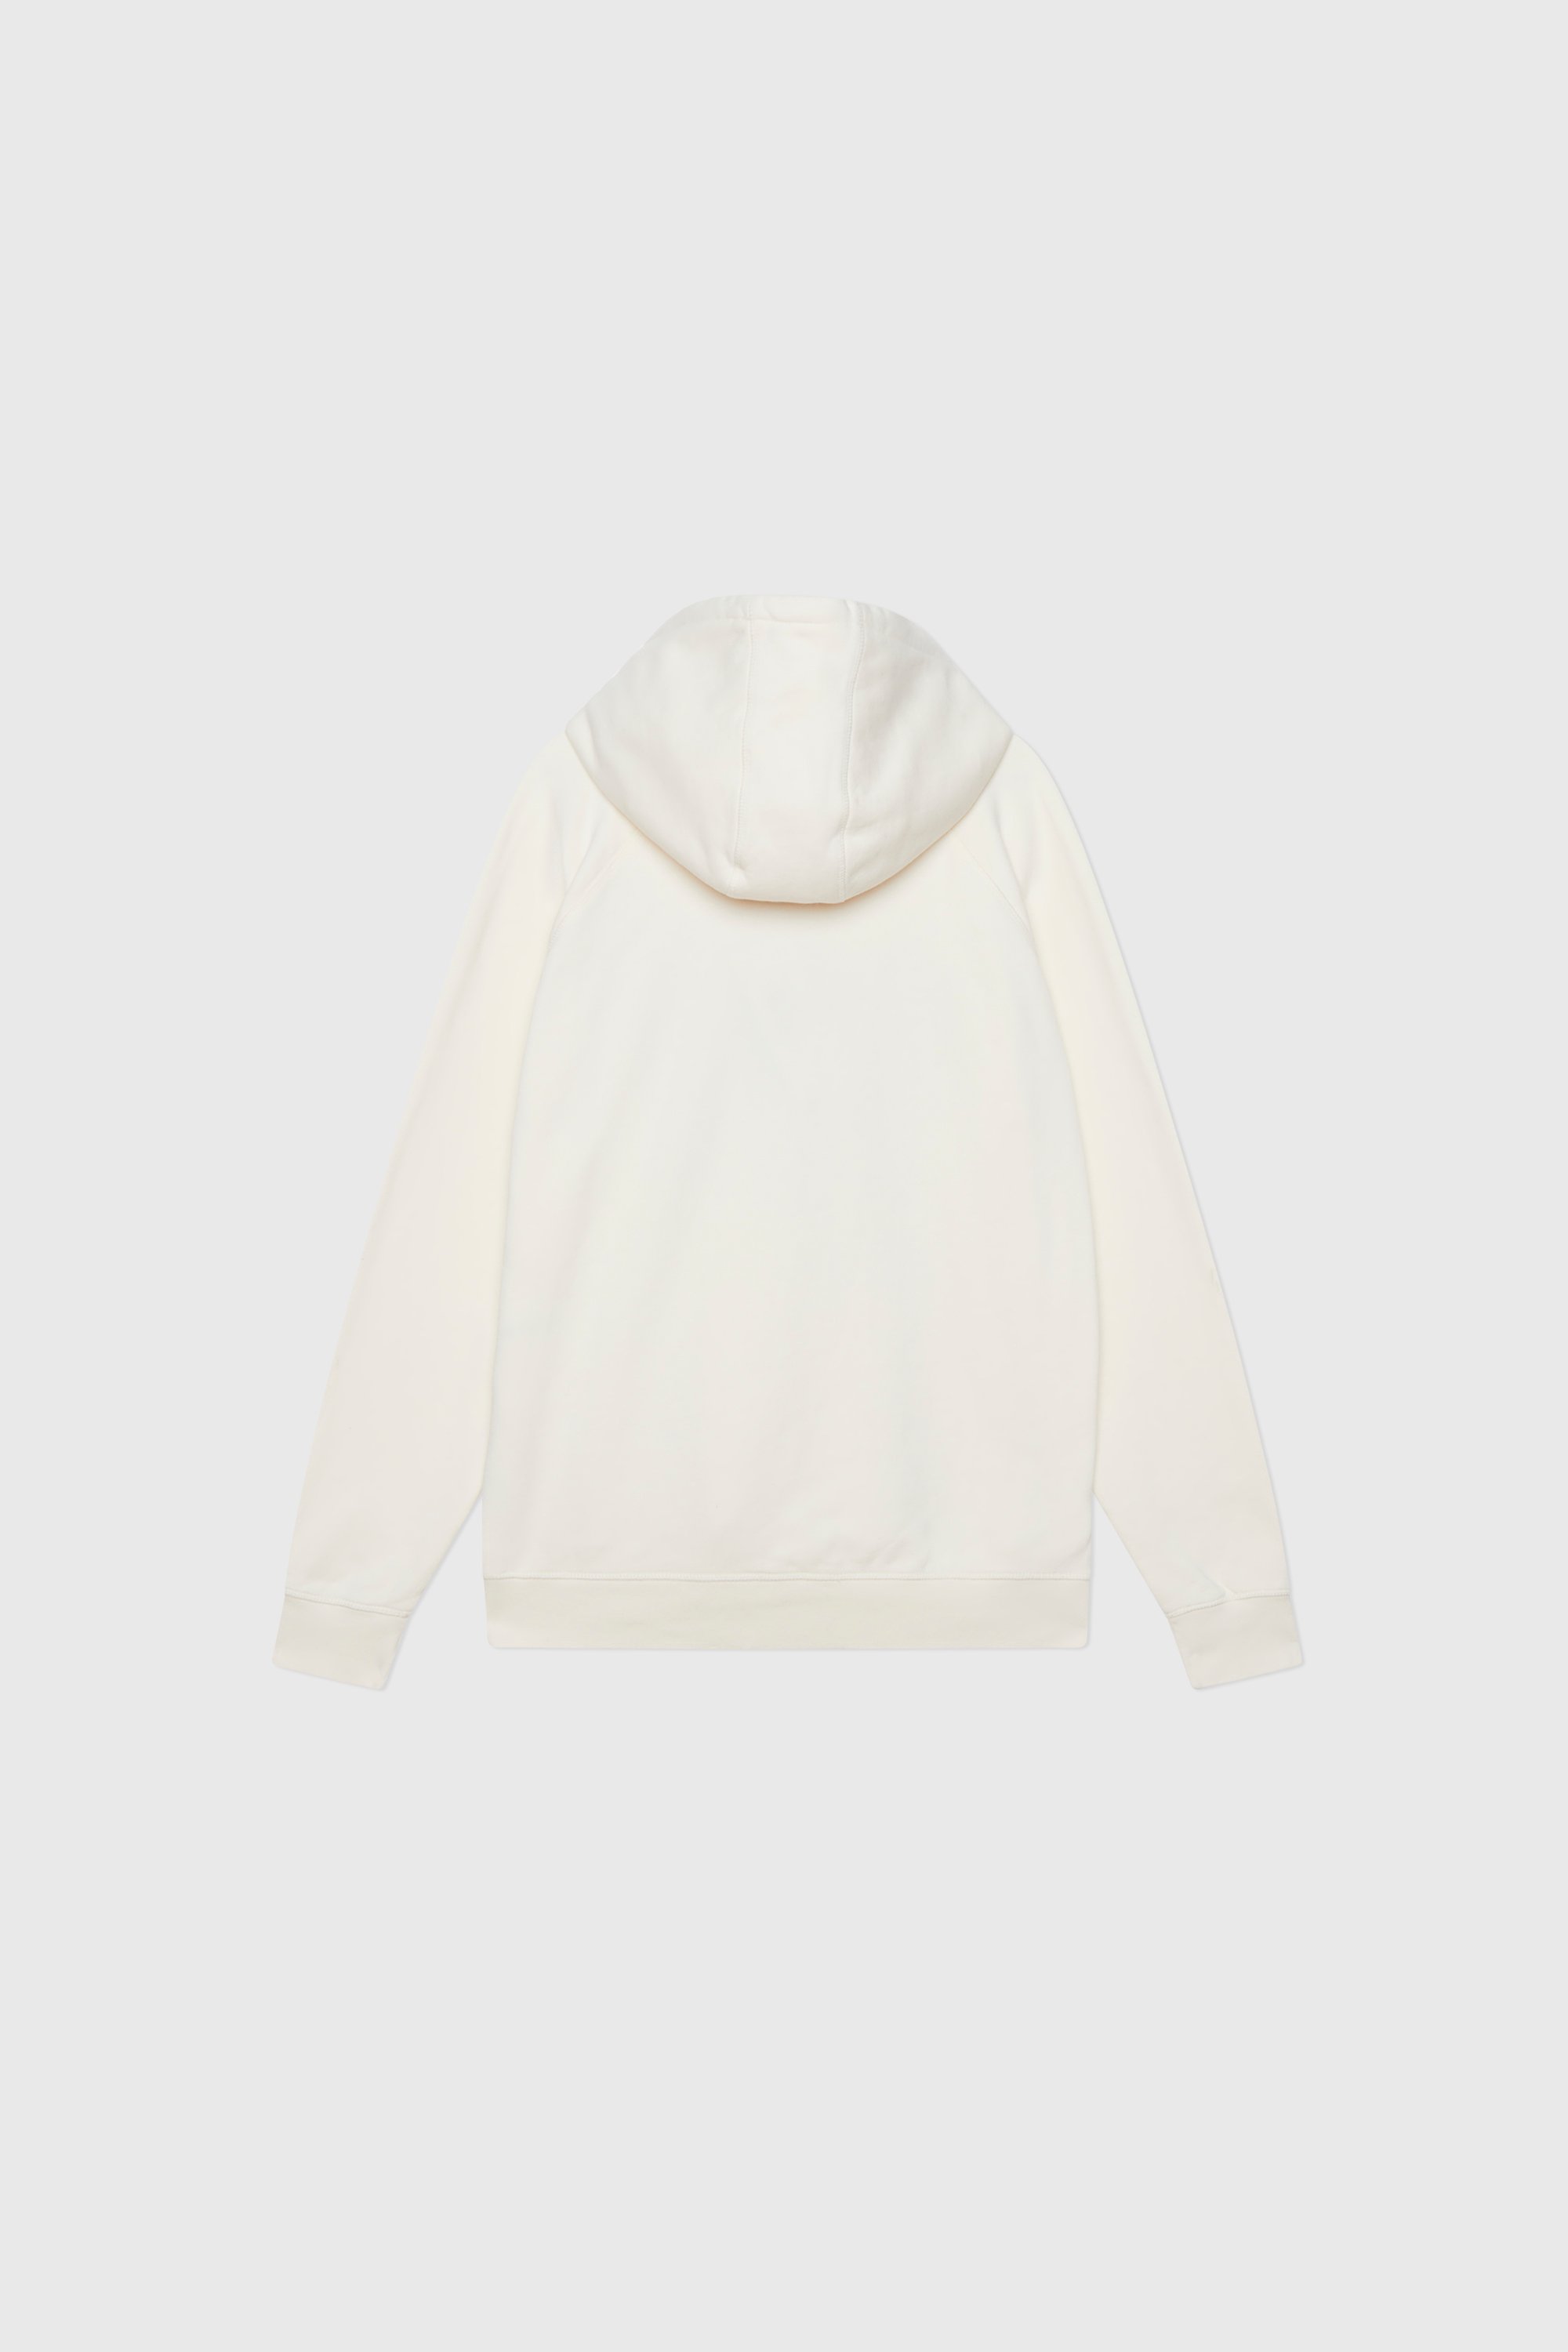 Pop Trading Company Arch Hooded Sweat Off-white | WoodWood.com